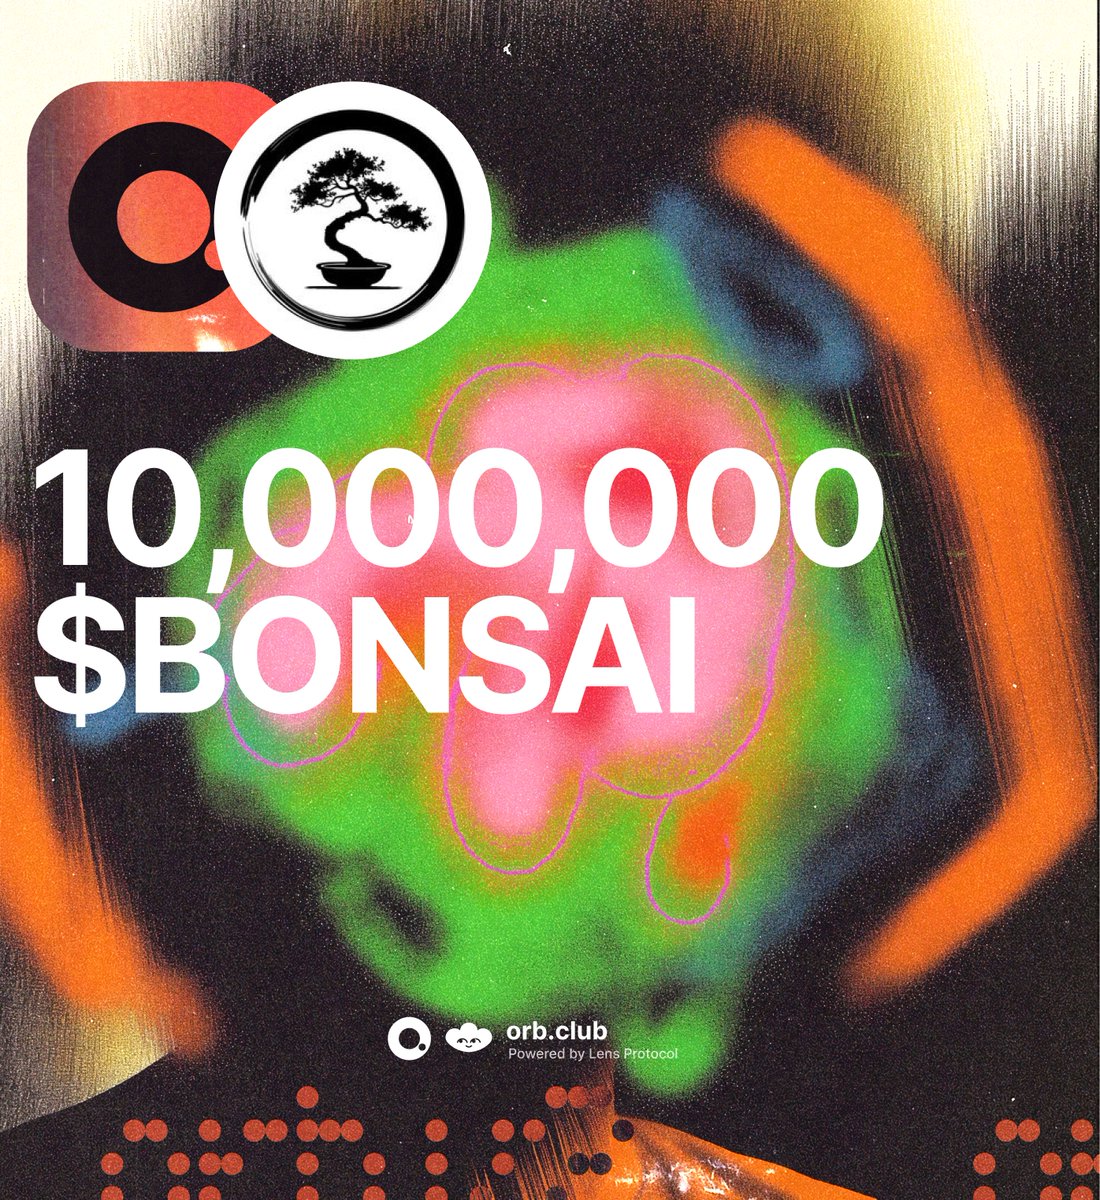 calling all creators and artists 👩🏿‍🎨👩🏻‍🎨🧑🏽‍🎨 the orb team is excited to announce we have received a 10,000,000 $BONSAI grant from the @bonsai_token404 team! 💰 this grant will be used to accelerate the app's growth by distributing to creatives, contributors, and even rewarding…